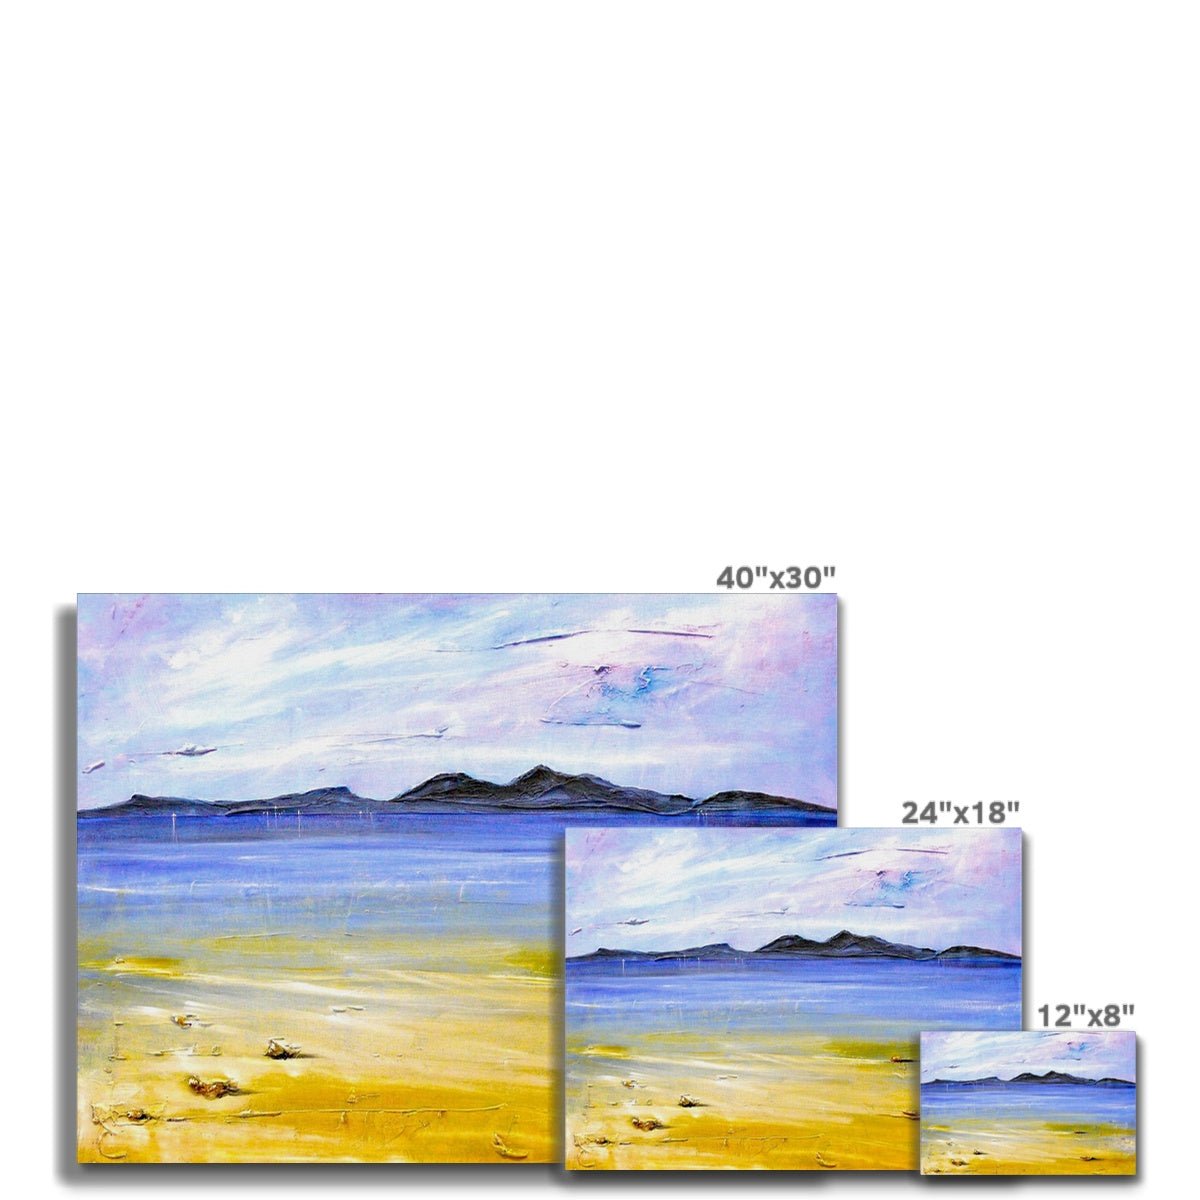 Camusdarach Beach Arisaig Painting | Canvas From Scotland-Contemporary Stretched Canvas Prints-Scottish Highlands & Lowlands Art Gallery-Paintings, Prints, Homeware, Art Gifts From Scotland By Scottish Artist Kevin Hunter